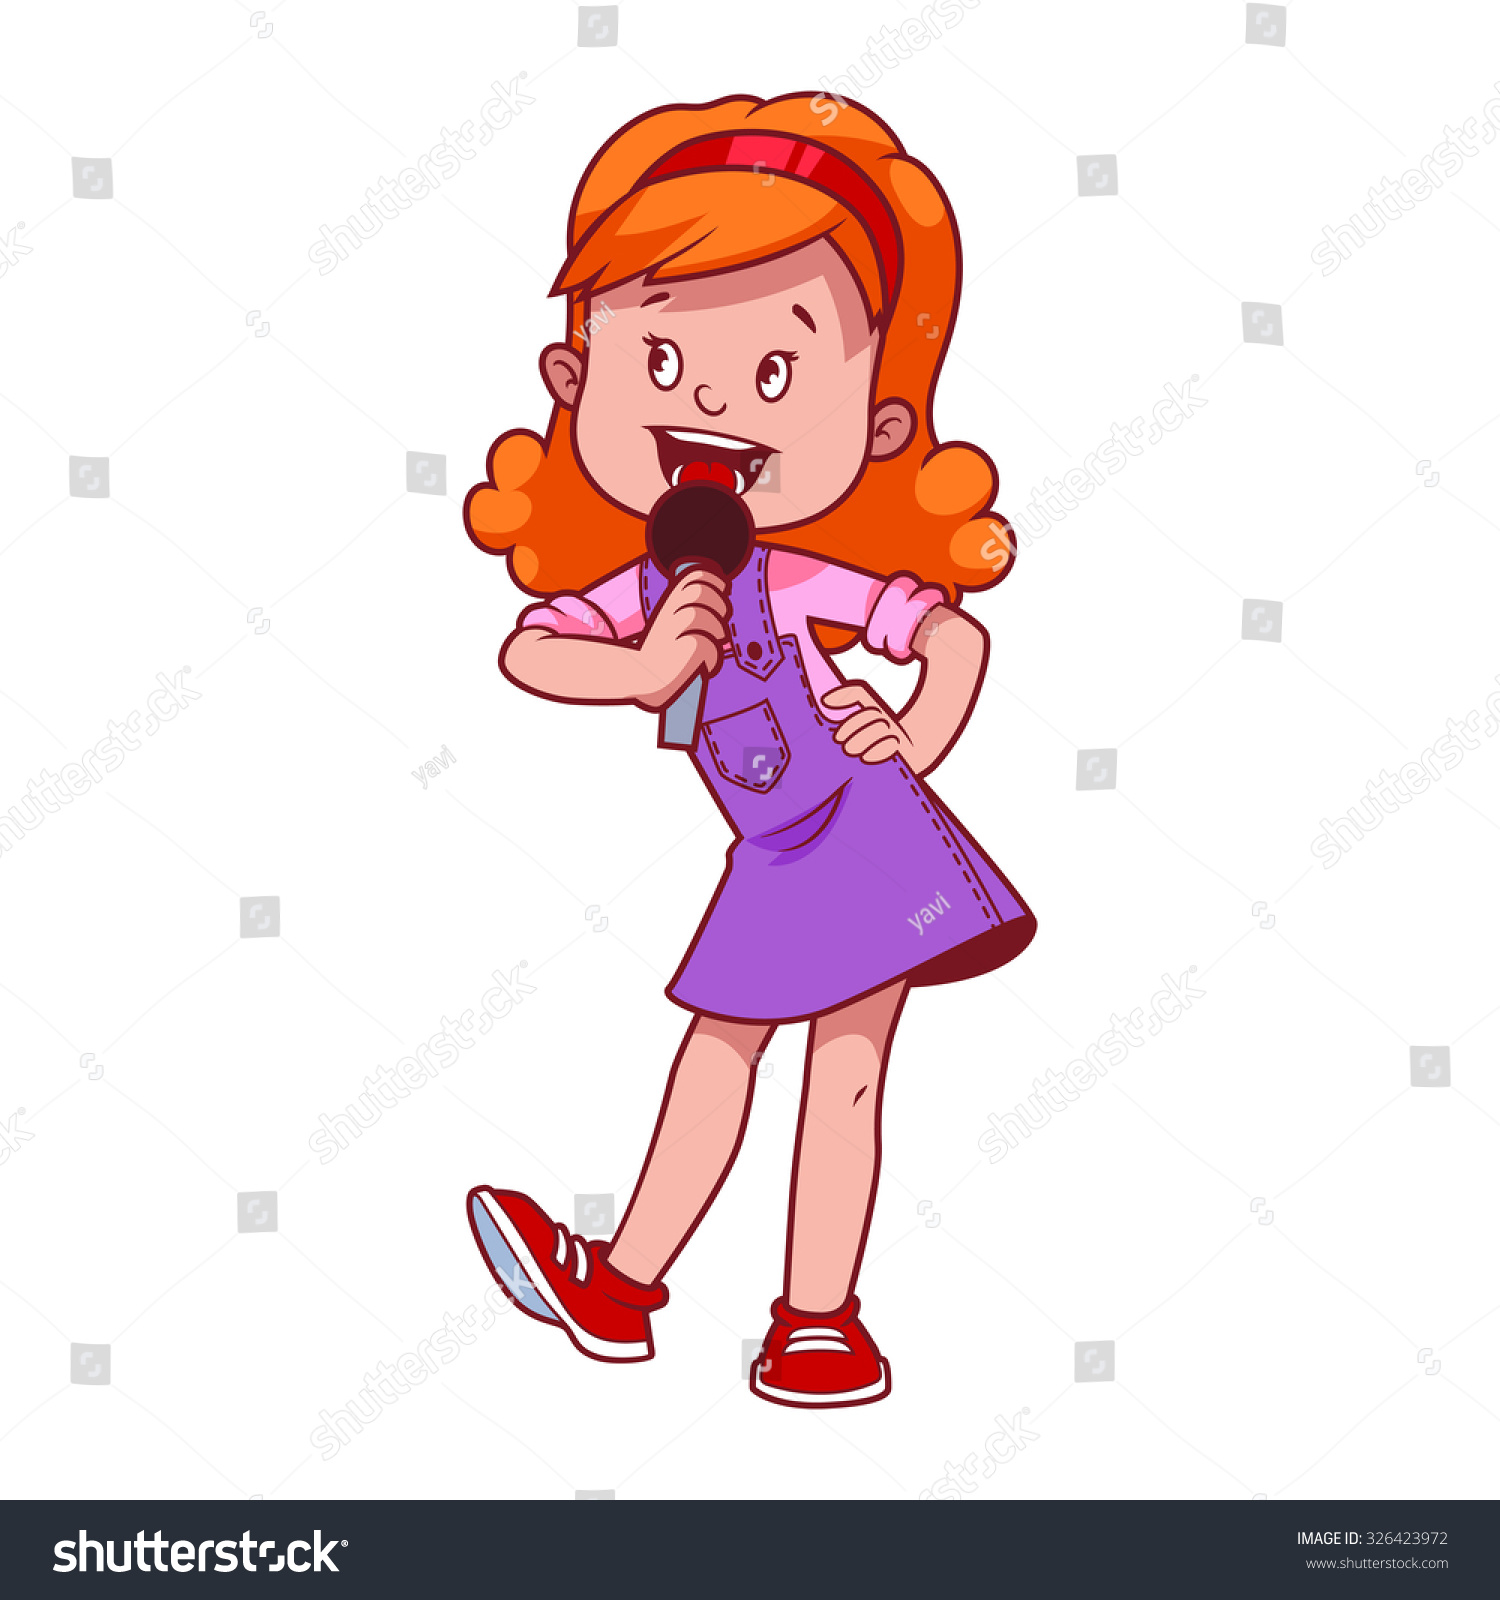 clipart of a girl singing - photo #37